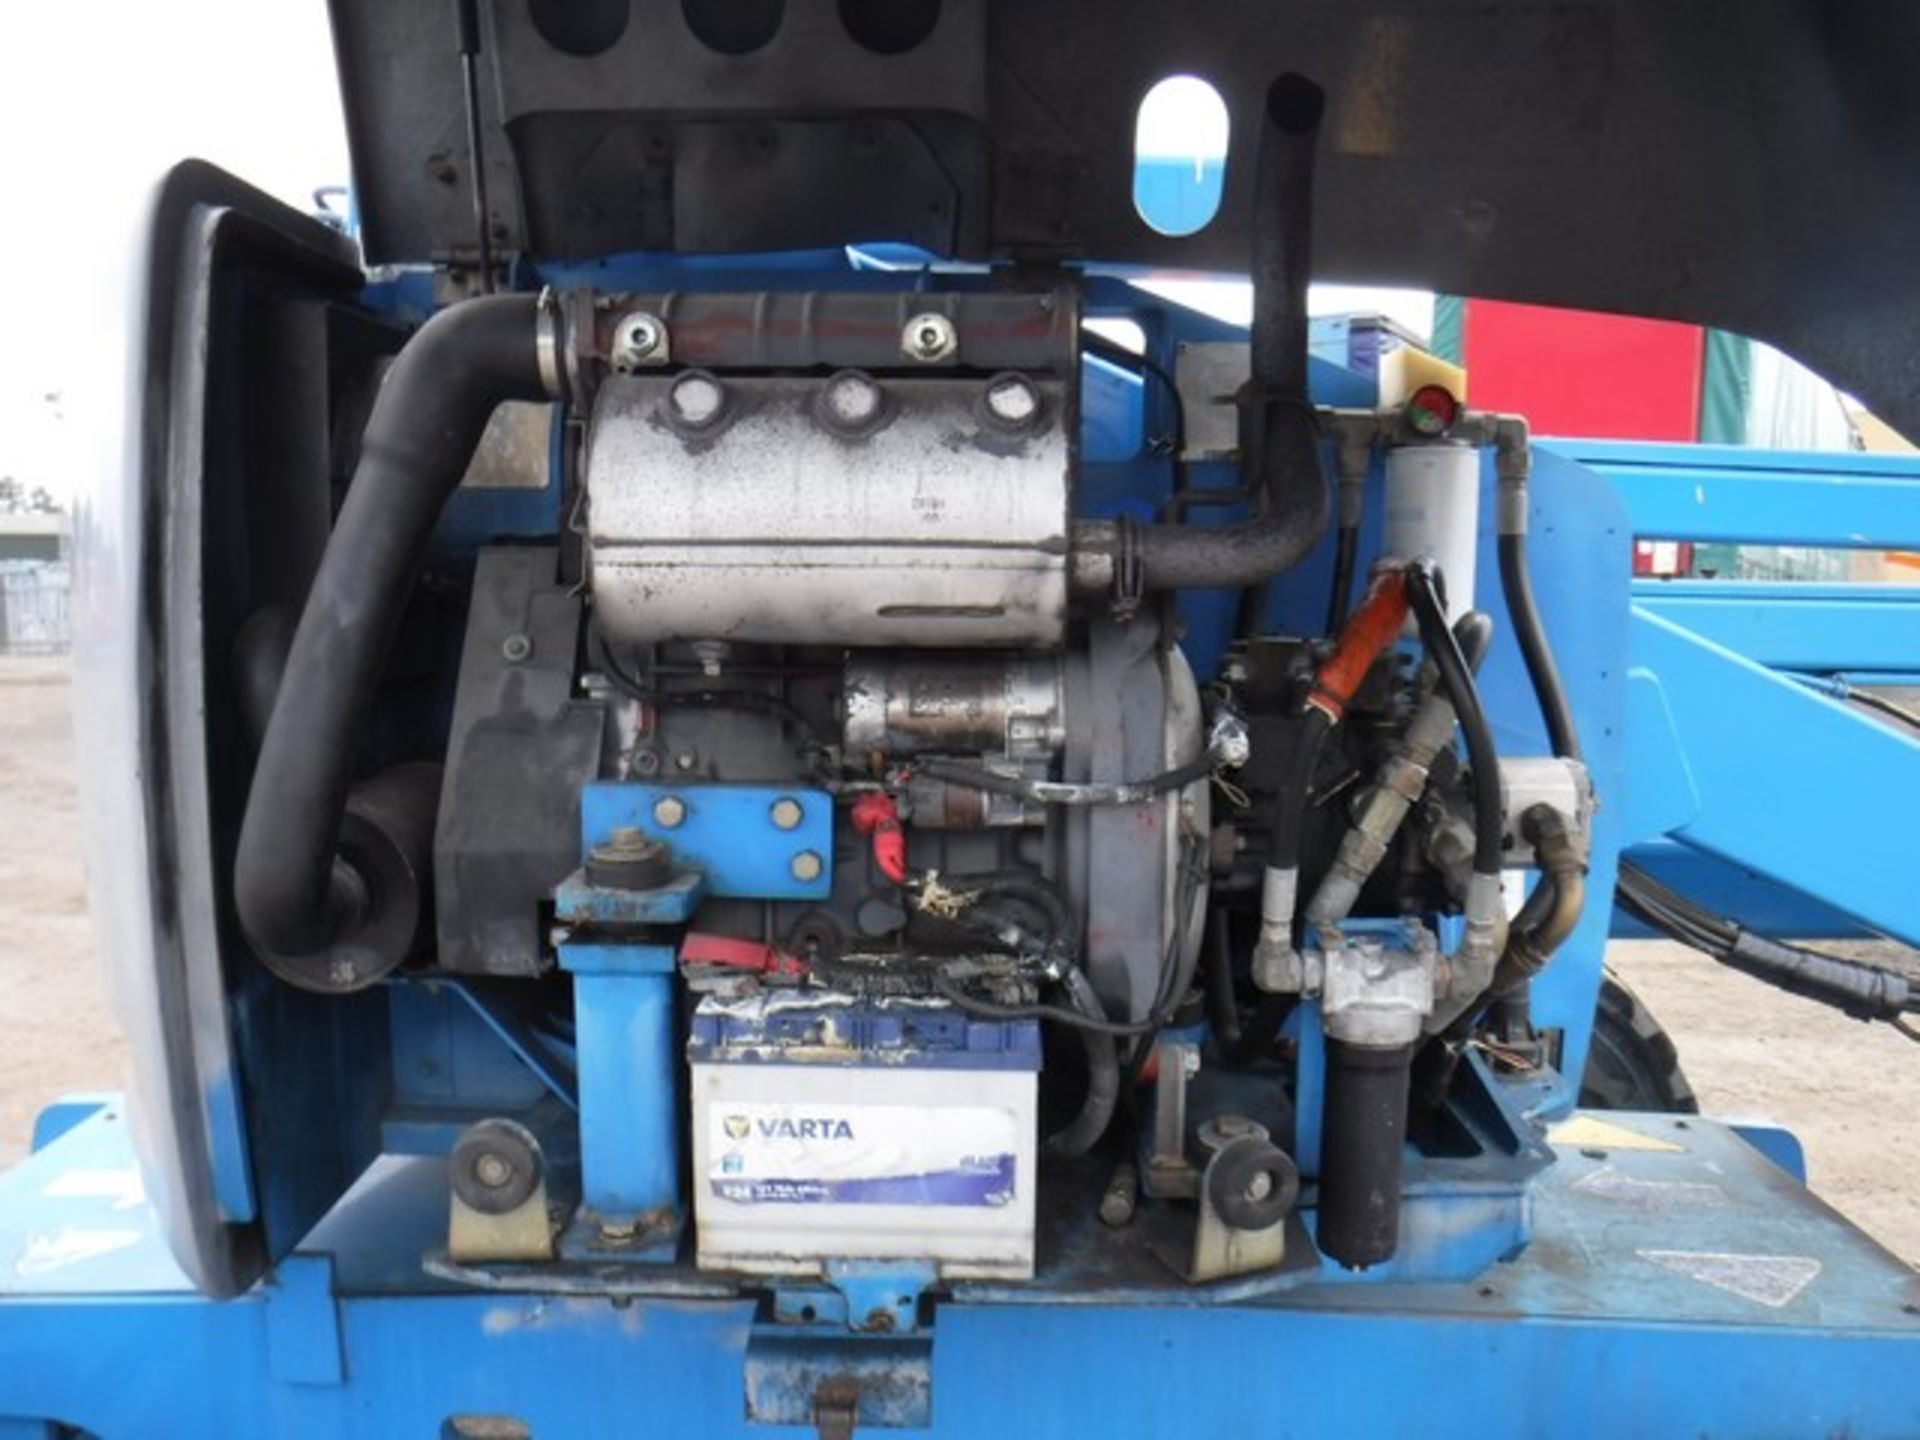 2000 GENIE BOOM LIFT Z45.25. S/N 15155. 8050.5hrs (not verified). Max working height 15.8m, outreach - Image 11 of 28